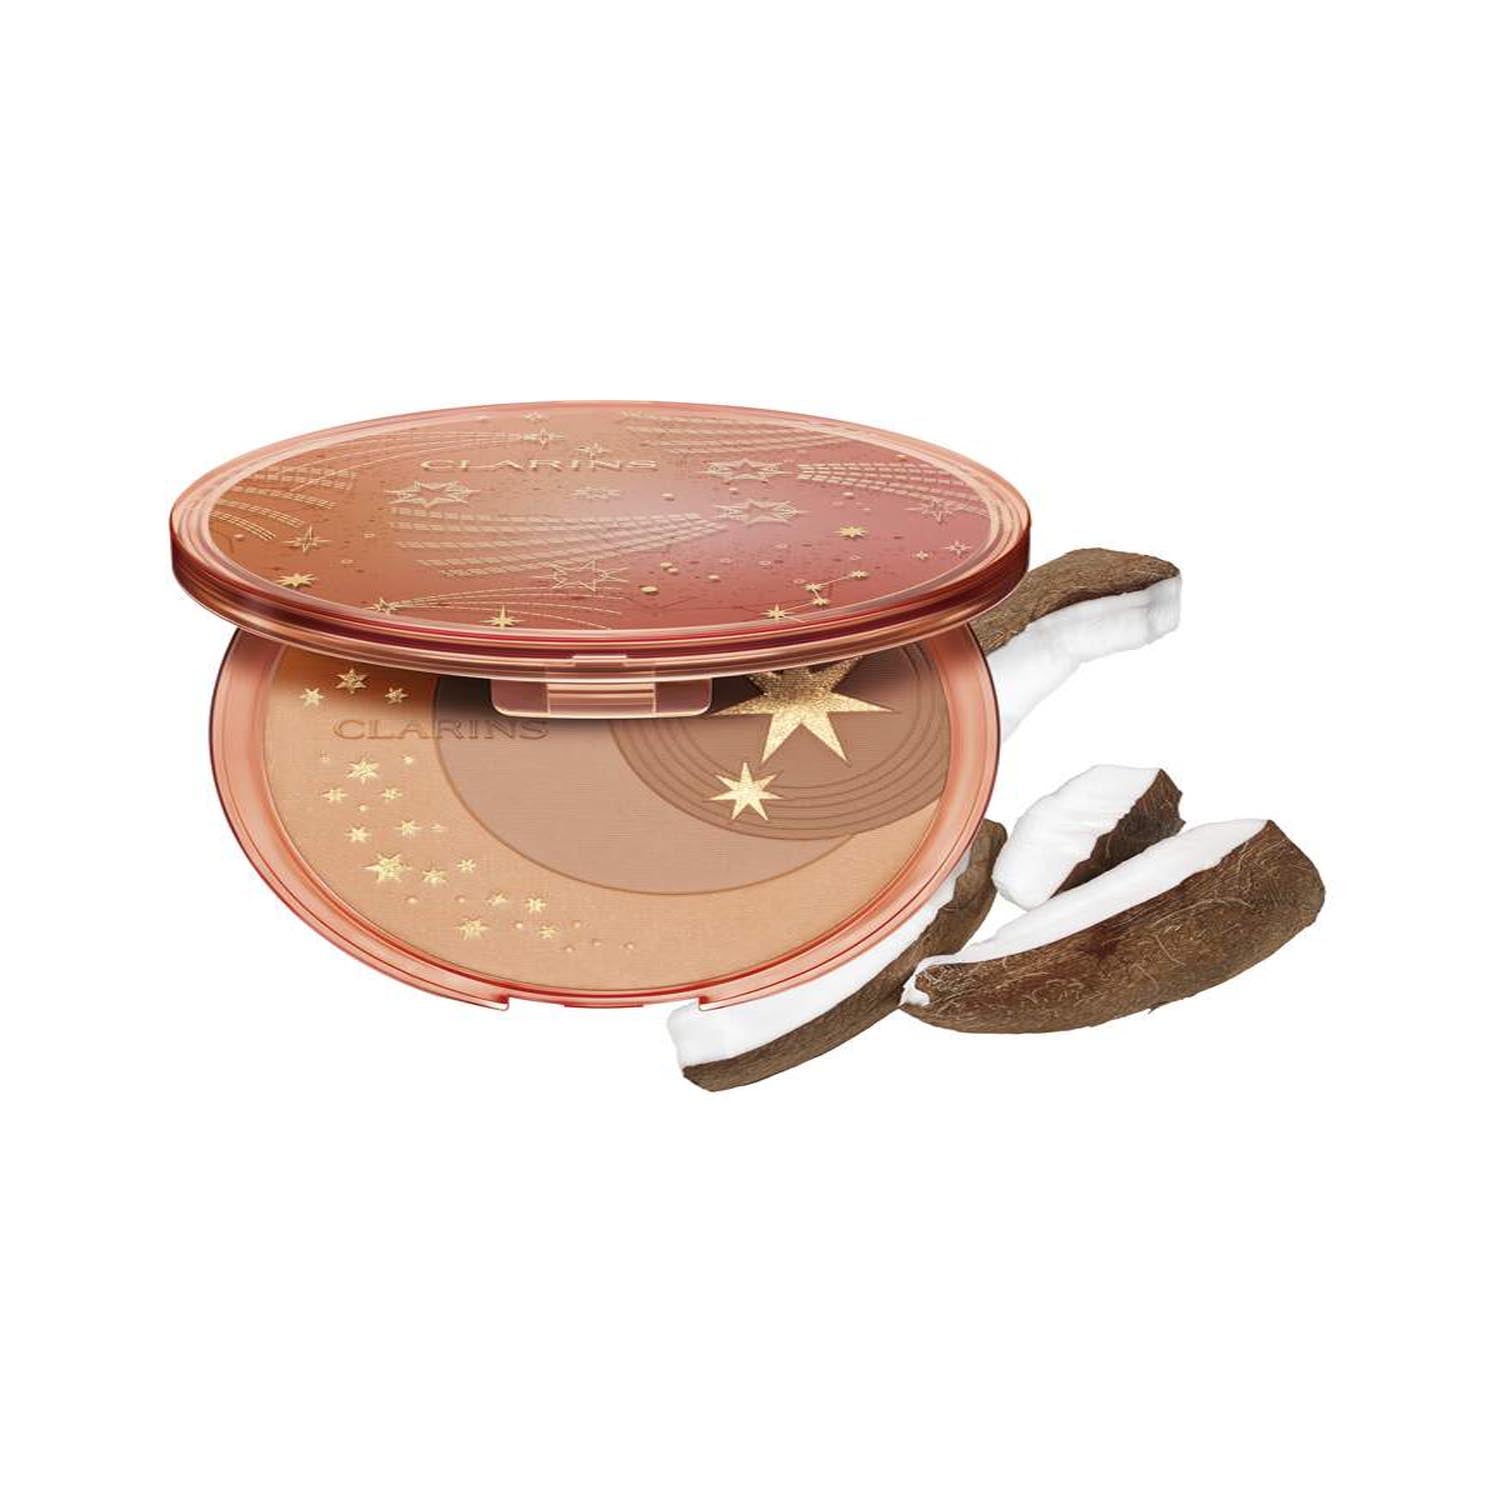 Clarins Summer In Rose Bronzing Compact 2 Shaws Department Stores